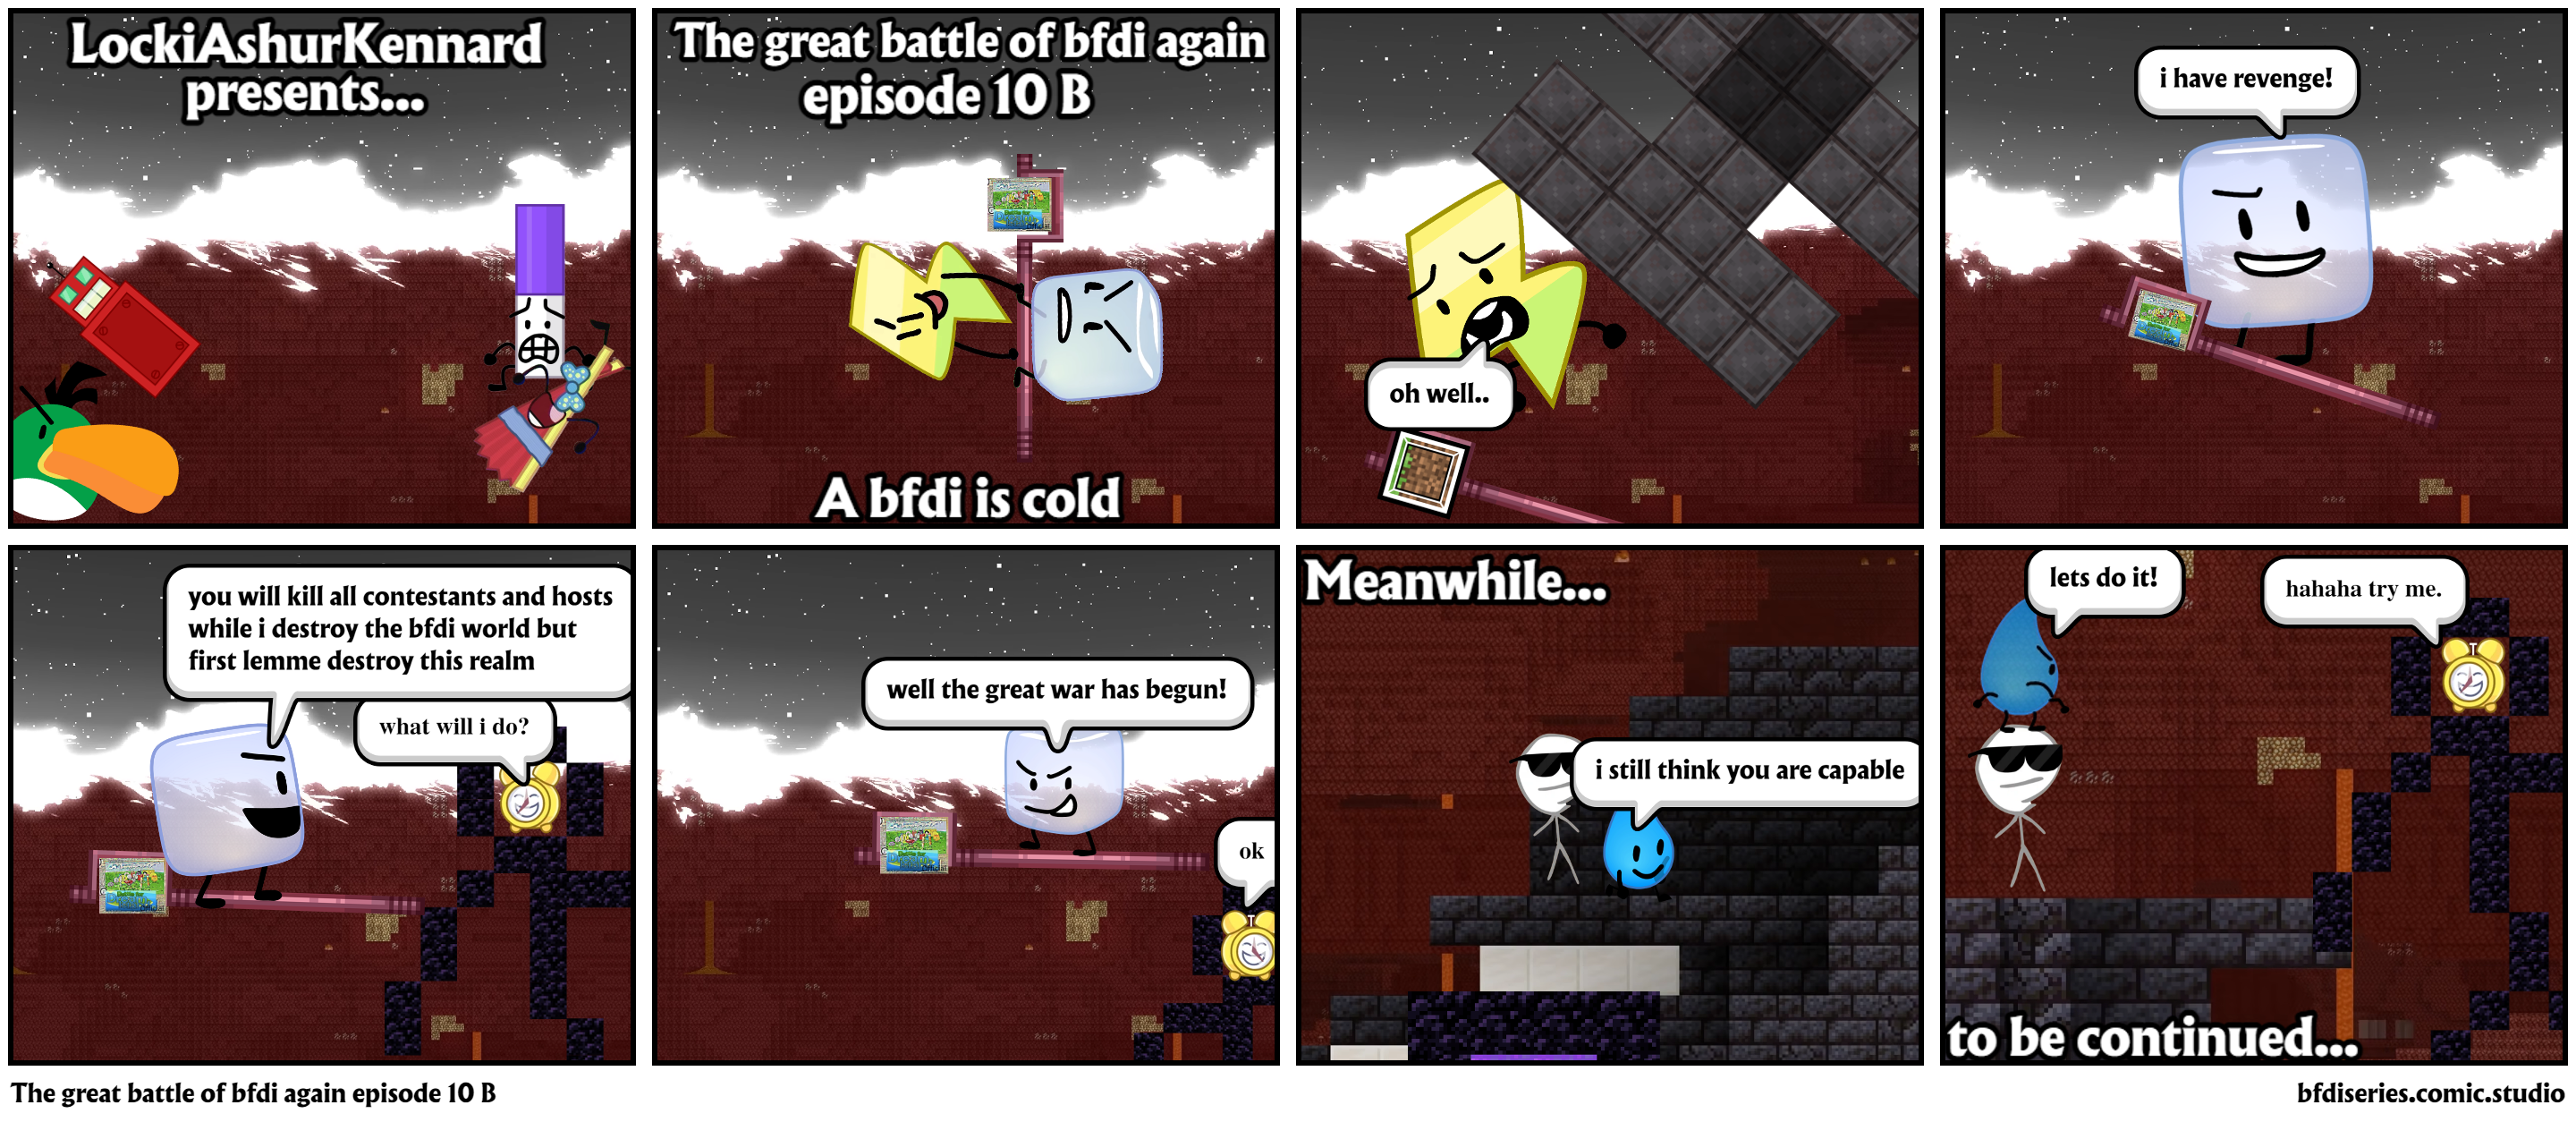 The great battle of bfdi again episode 10 B